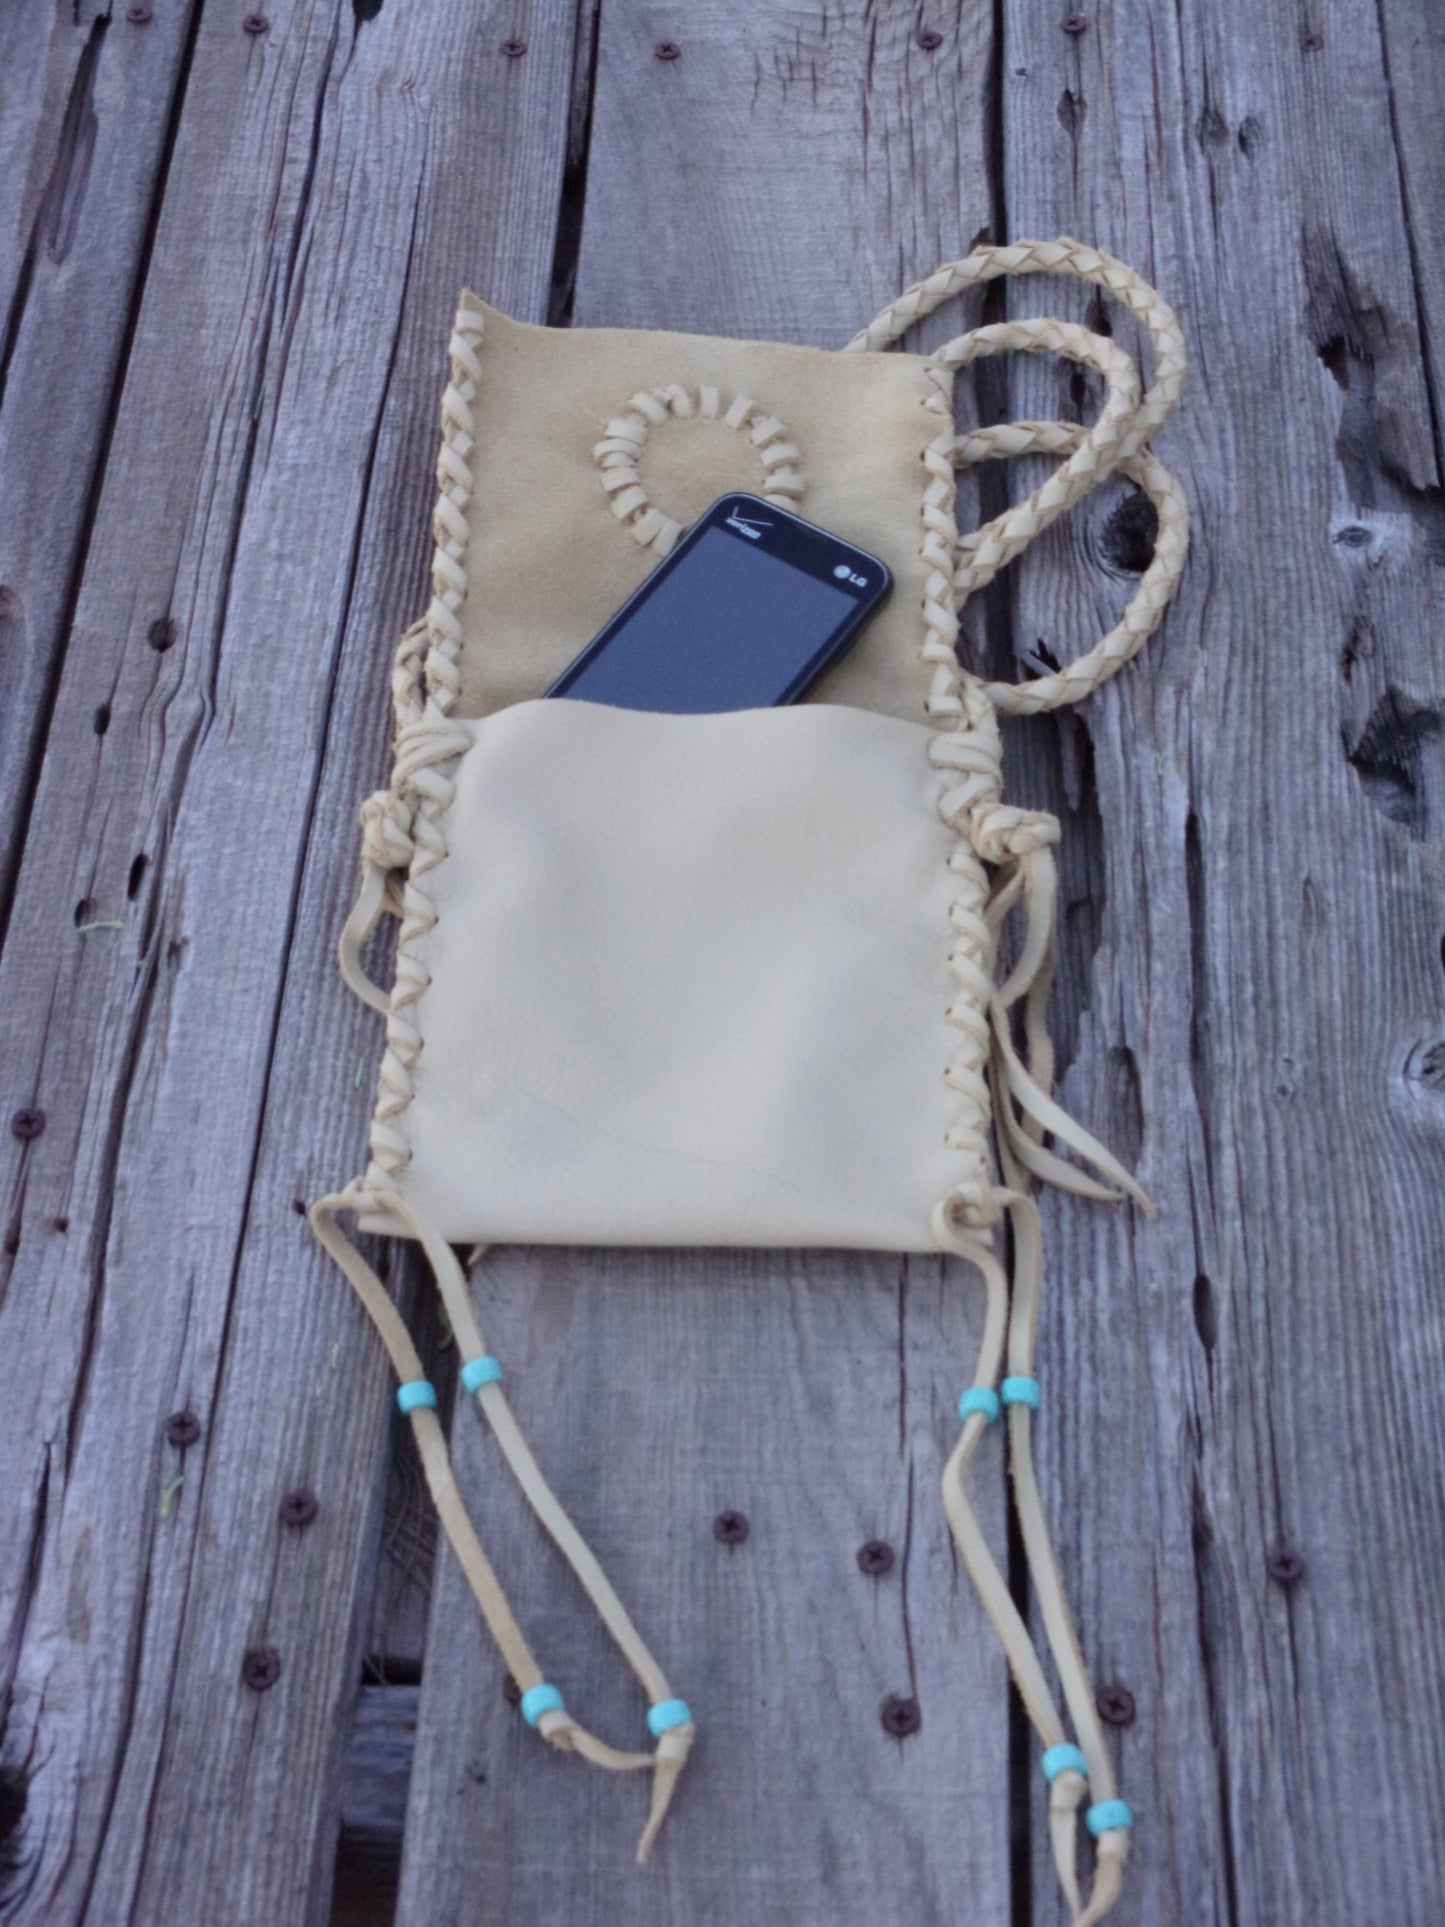 Beaded leather phone bag, small purse